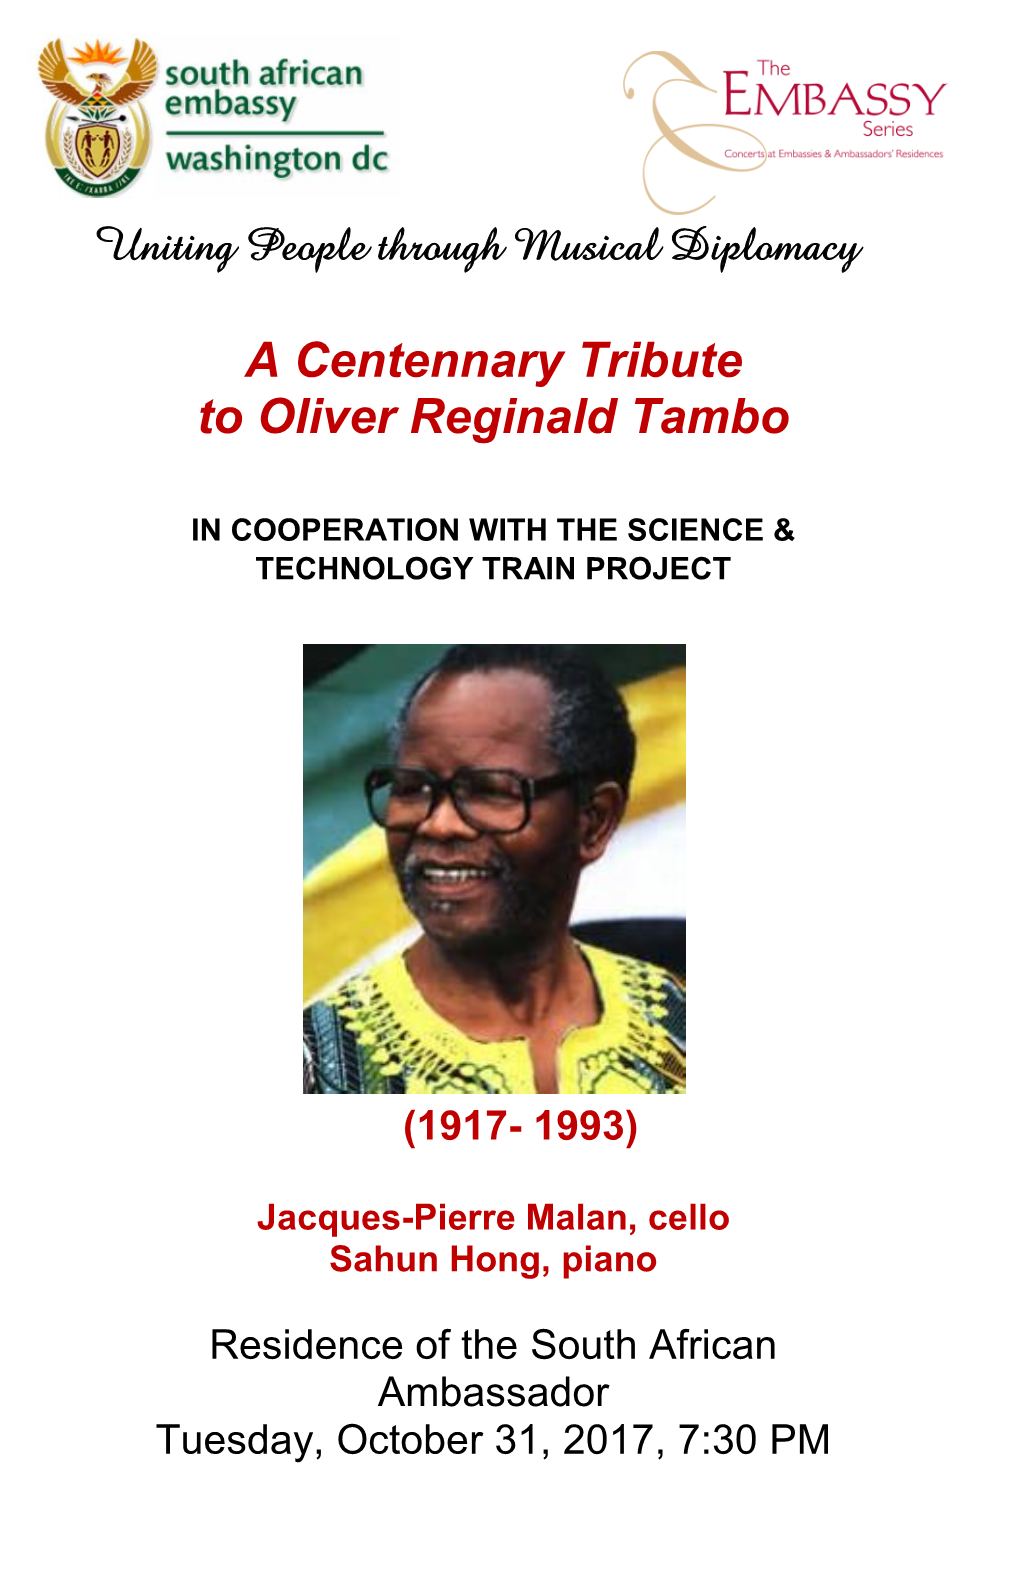 A Centennary Tribute to Oliver Reginald Tambo